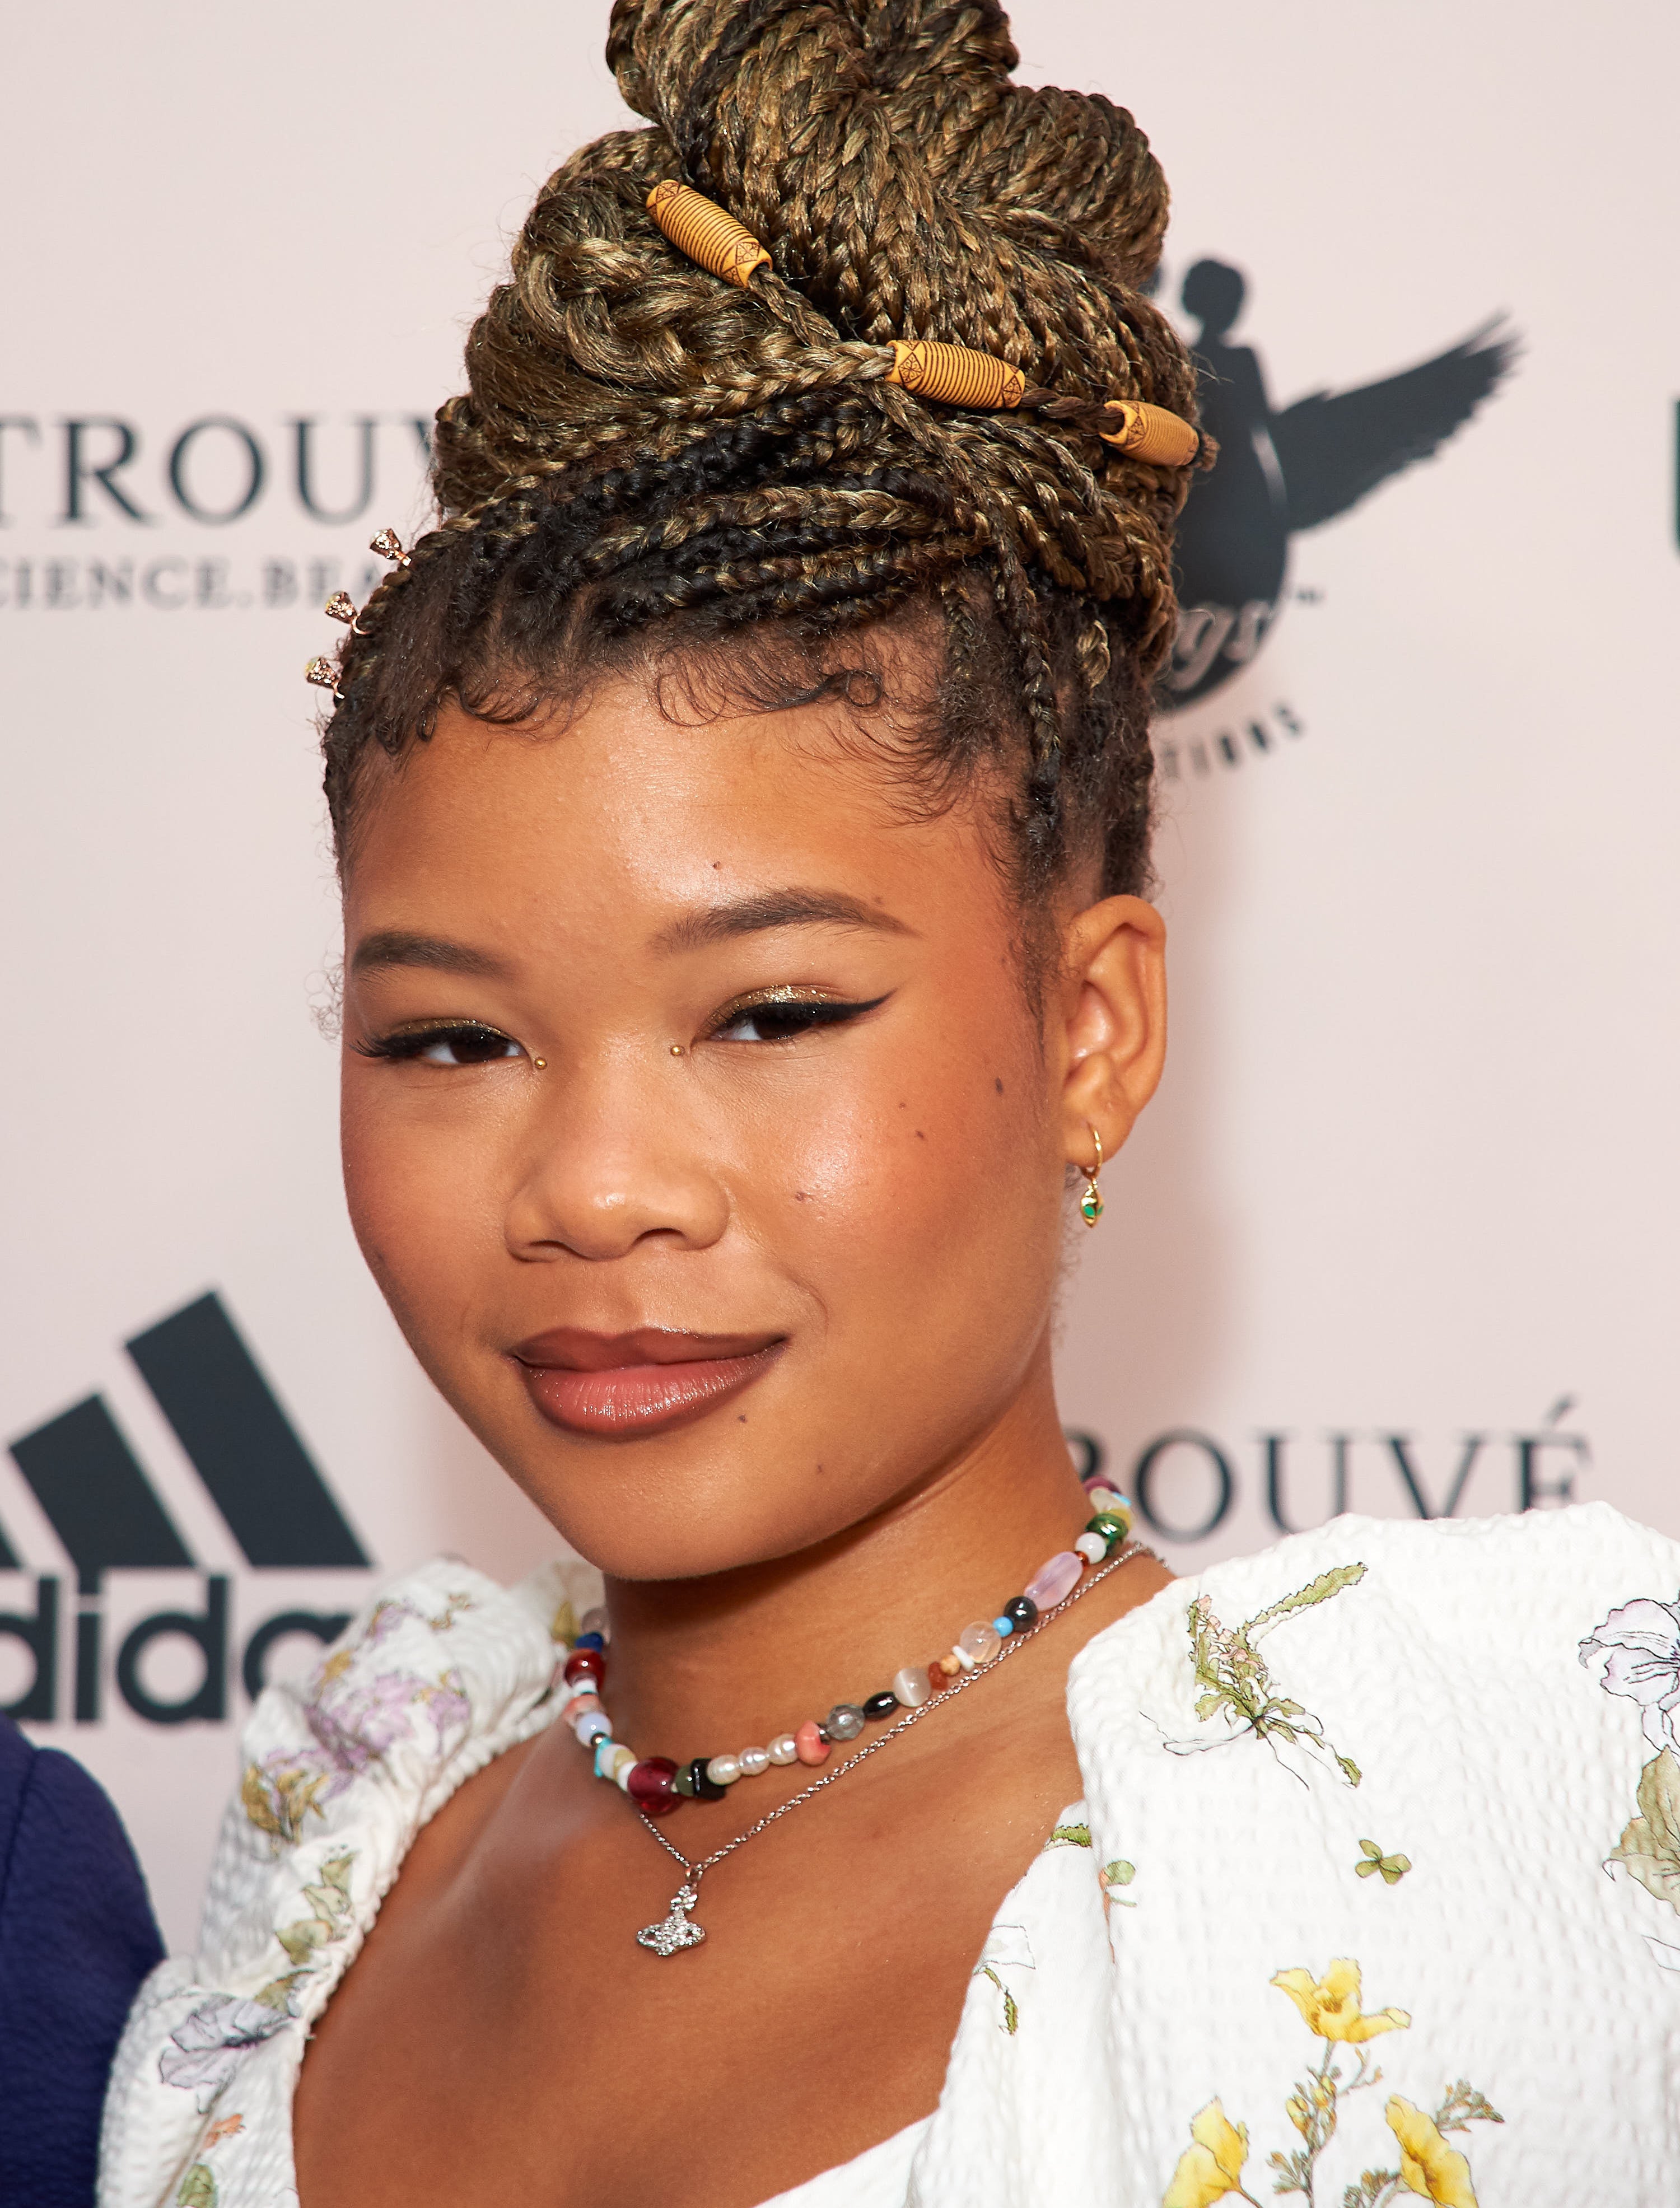 Storm Reid attends the 13th Annual Ladylike Women Of Excellence Awards x Fashion Show